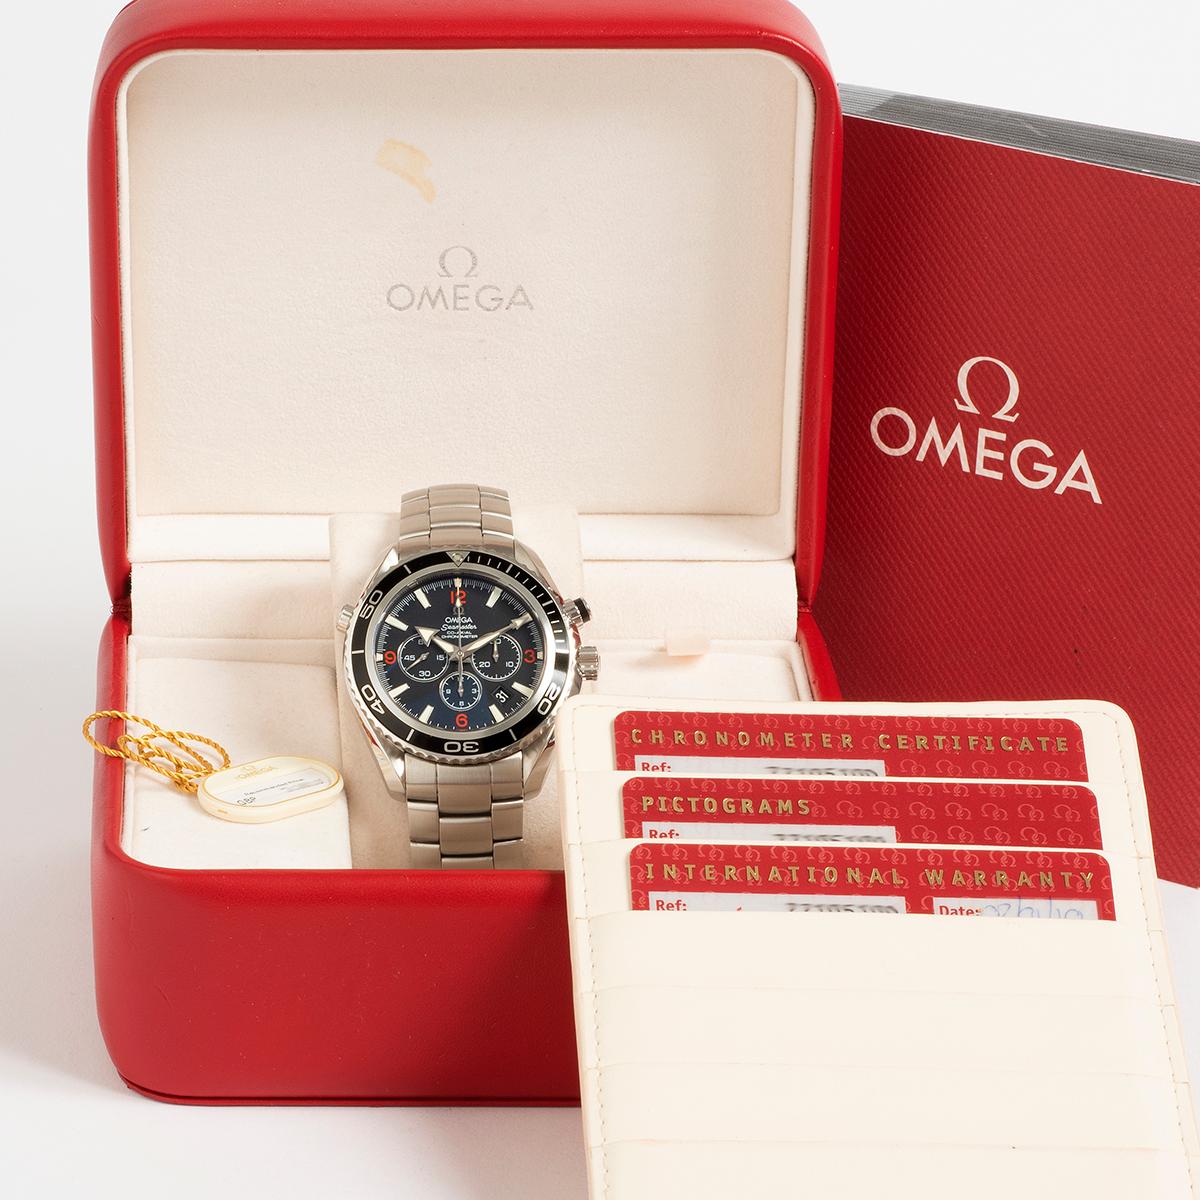 Our classic and stunning Omega Seamaster Planet Ocean Chronograph with date, reference 2210.51.00 , is presented in outstanding condition with light signs of use from new. This version, with black dial and red indices, features a prominent 45.5mm